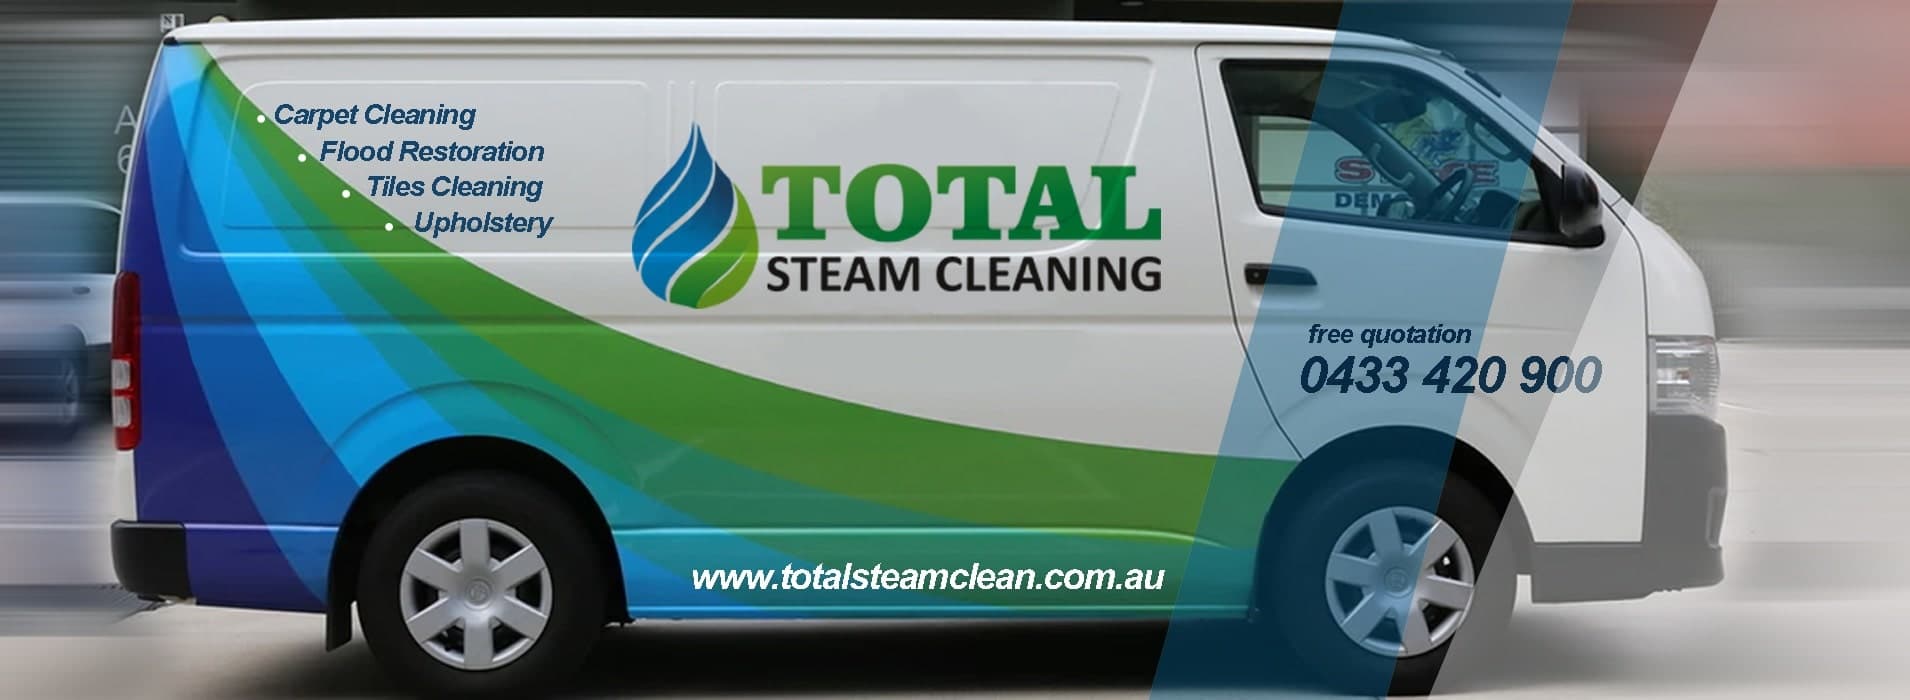 Total Steam Cleaning Banner